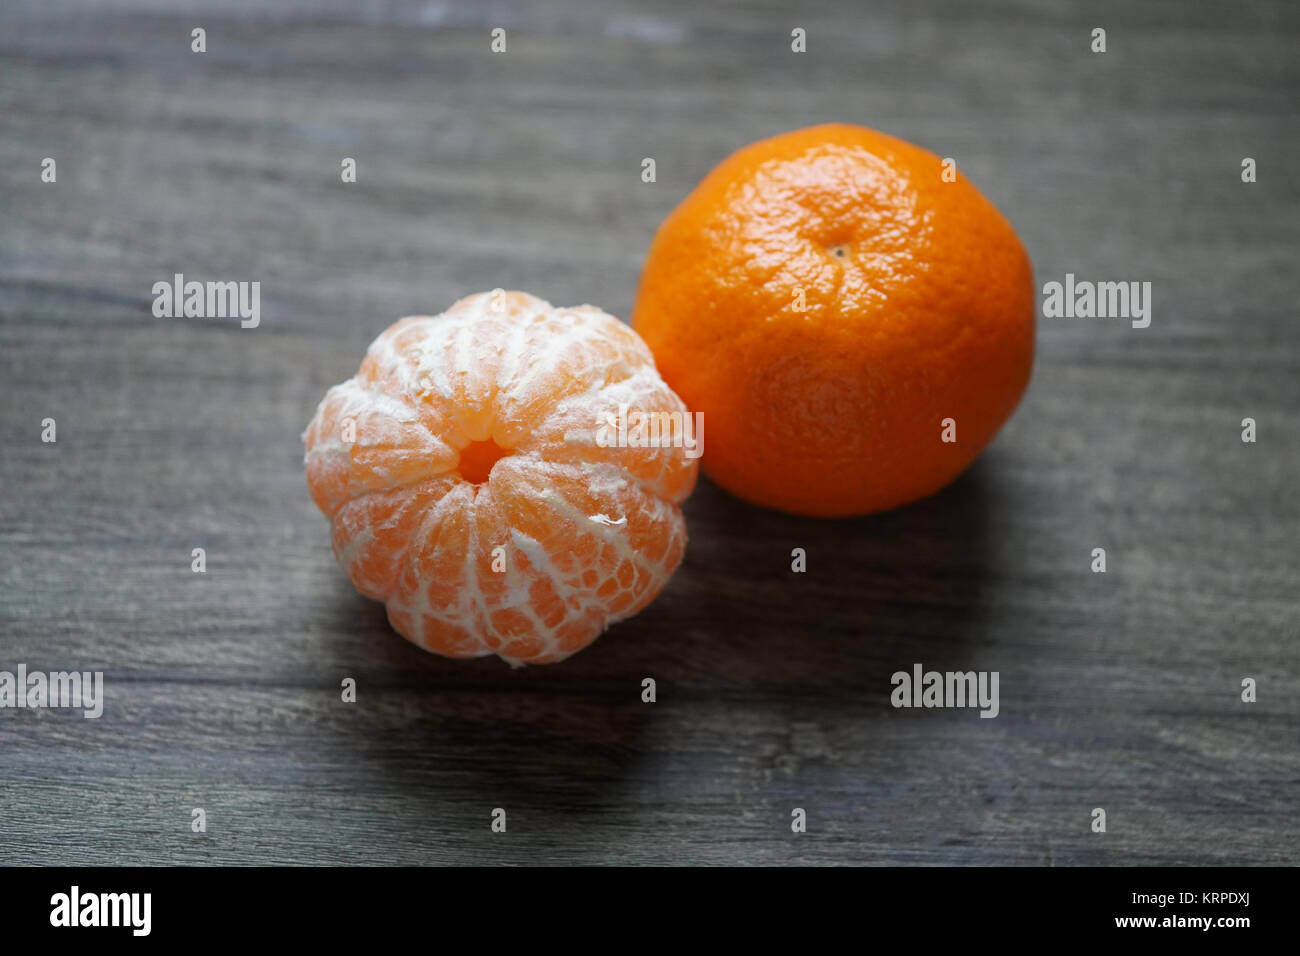 clementines or tangerines or mandarin oranges on rustic wooden table Stock Photo